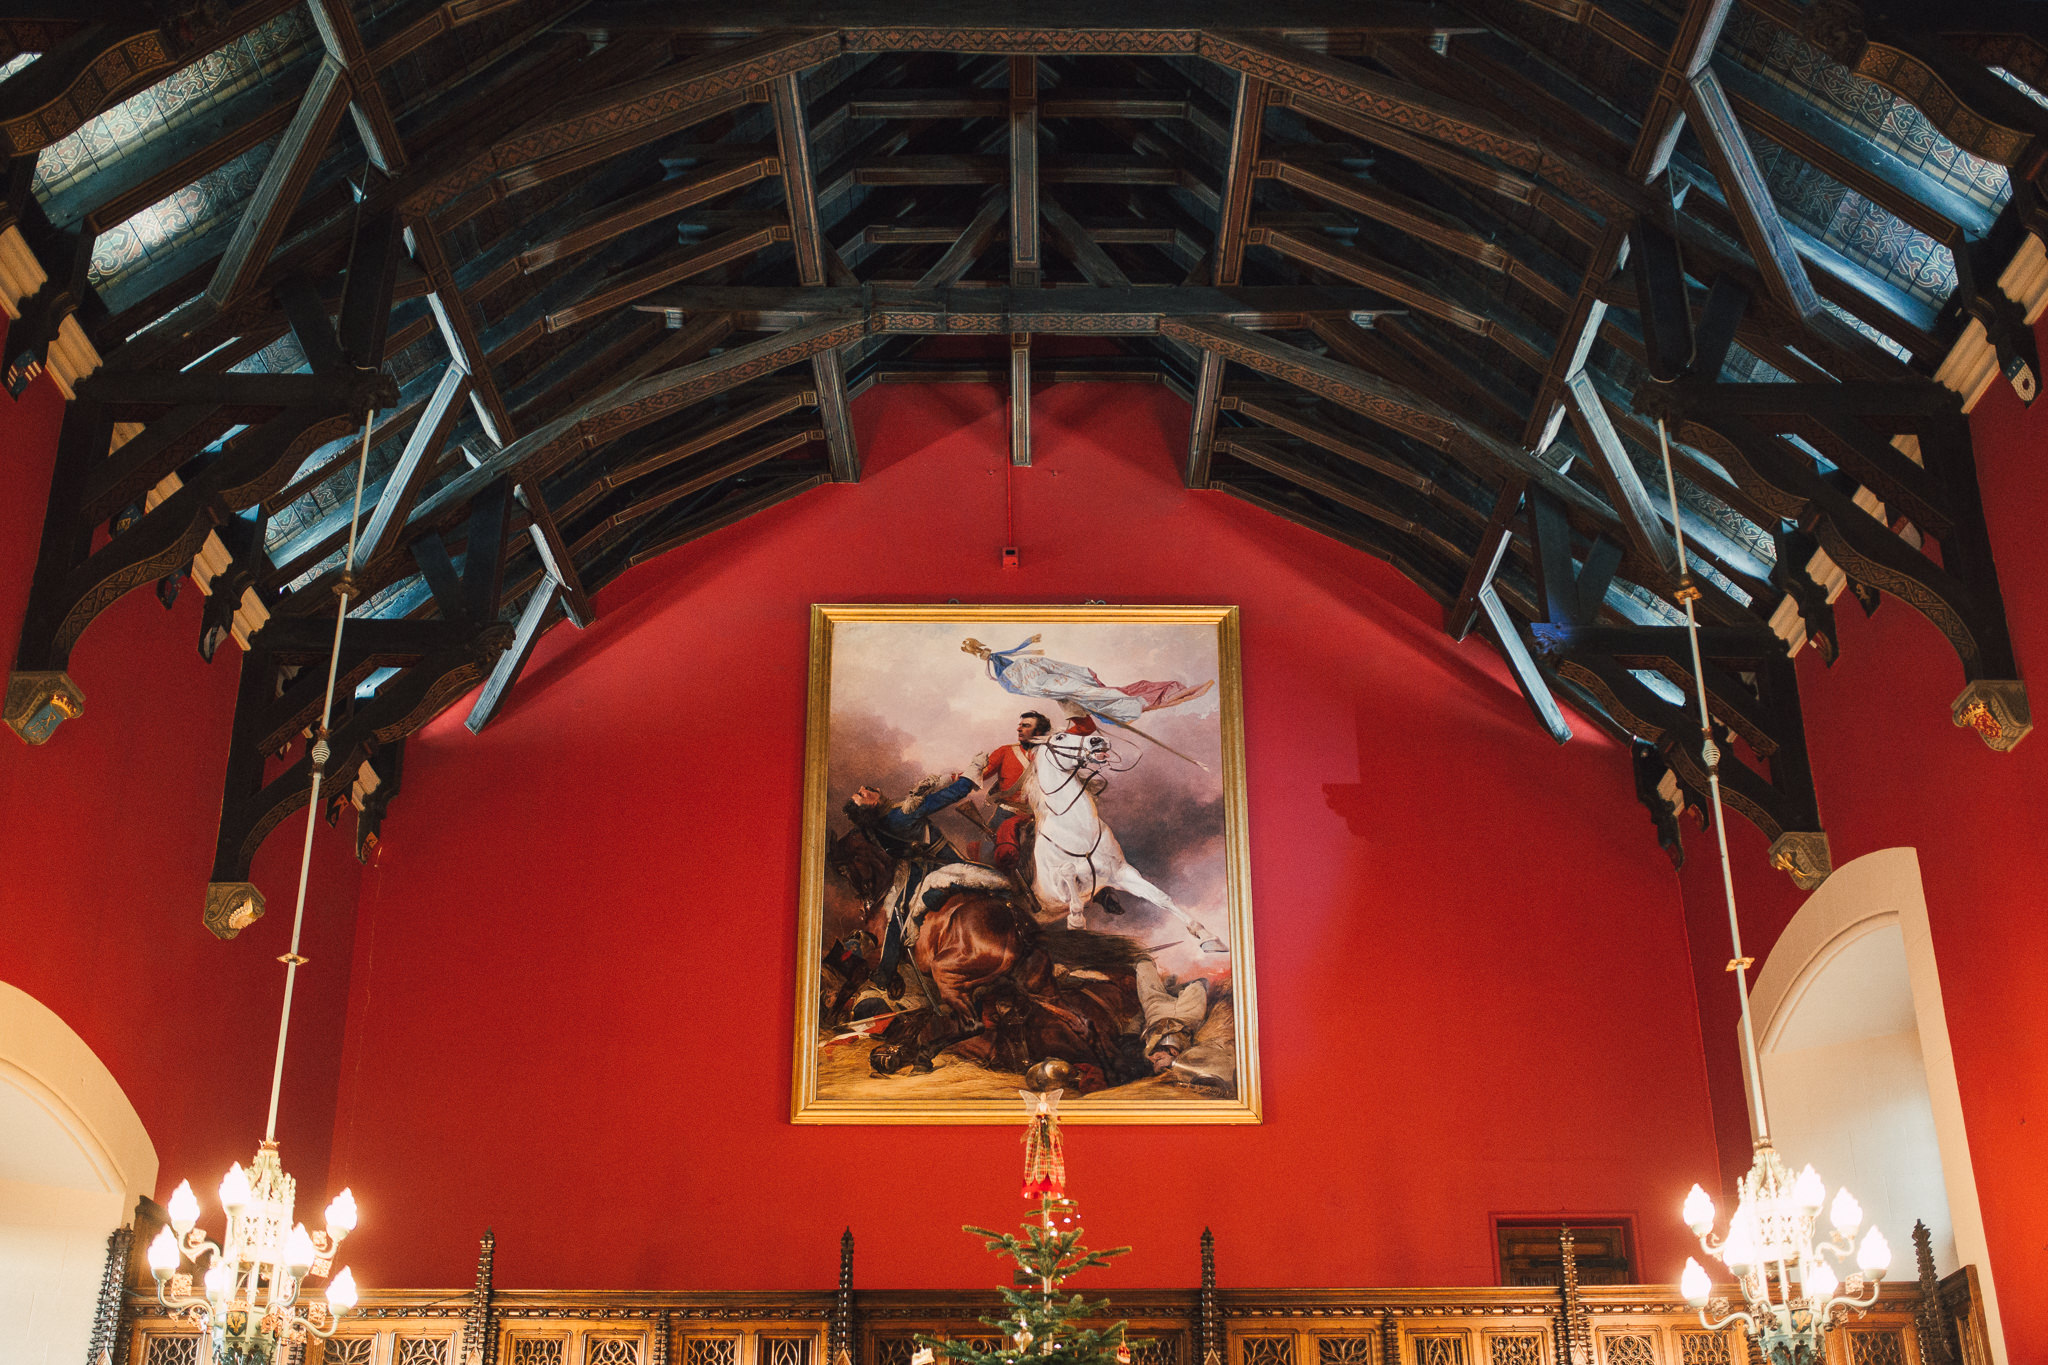   Edinburgh Castle’s Great Hall. Painting is of Sergeant Charles Ewart of the Royal North British Dragoons (the Scots Greys), who single-handedly captured the eagle and standard of the French 45th infantry at Waterloo on 18 June 1815  